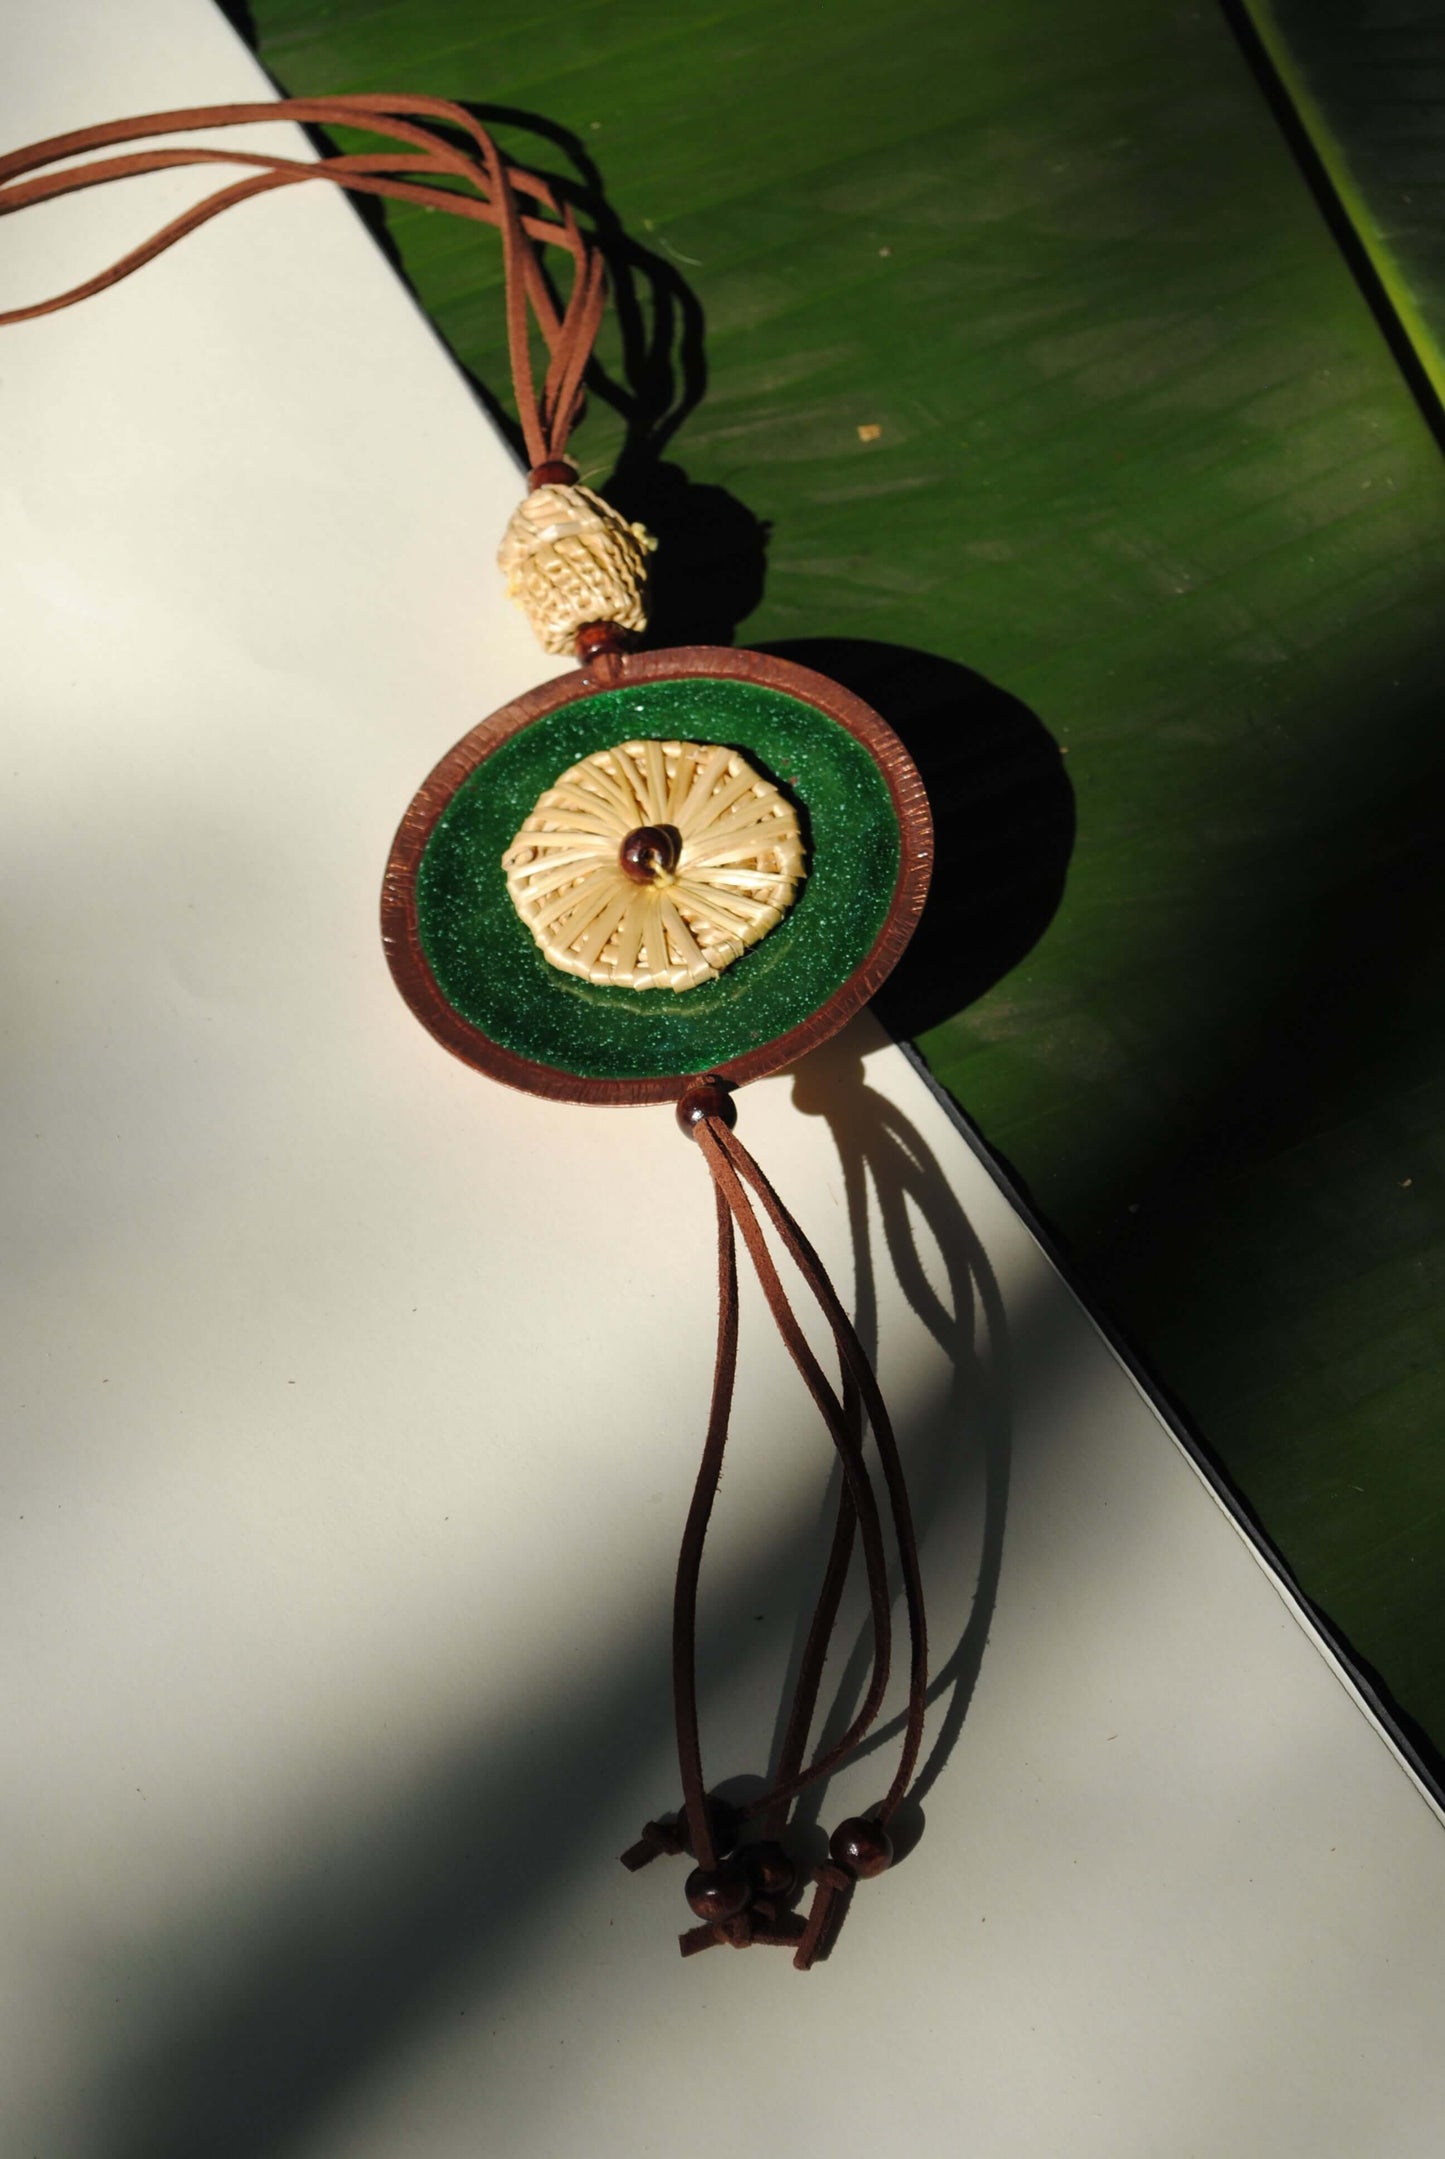 Truna natural fibre golden grass and copper enamel handcrafted jewelry from Odisha, Vaati green pendant